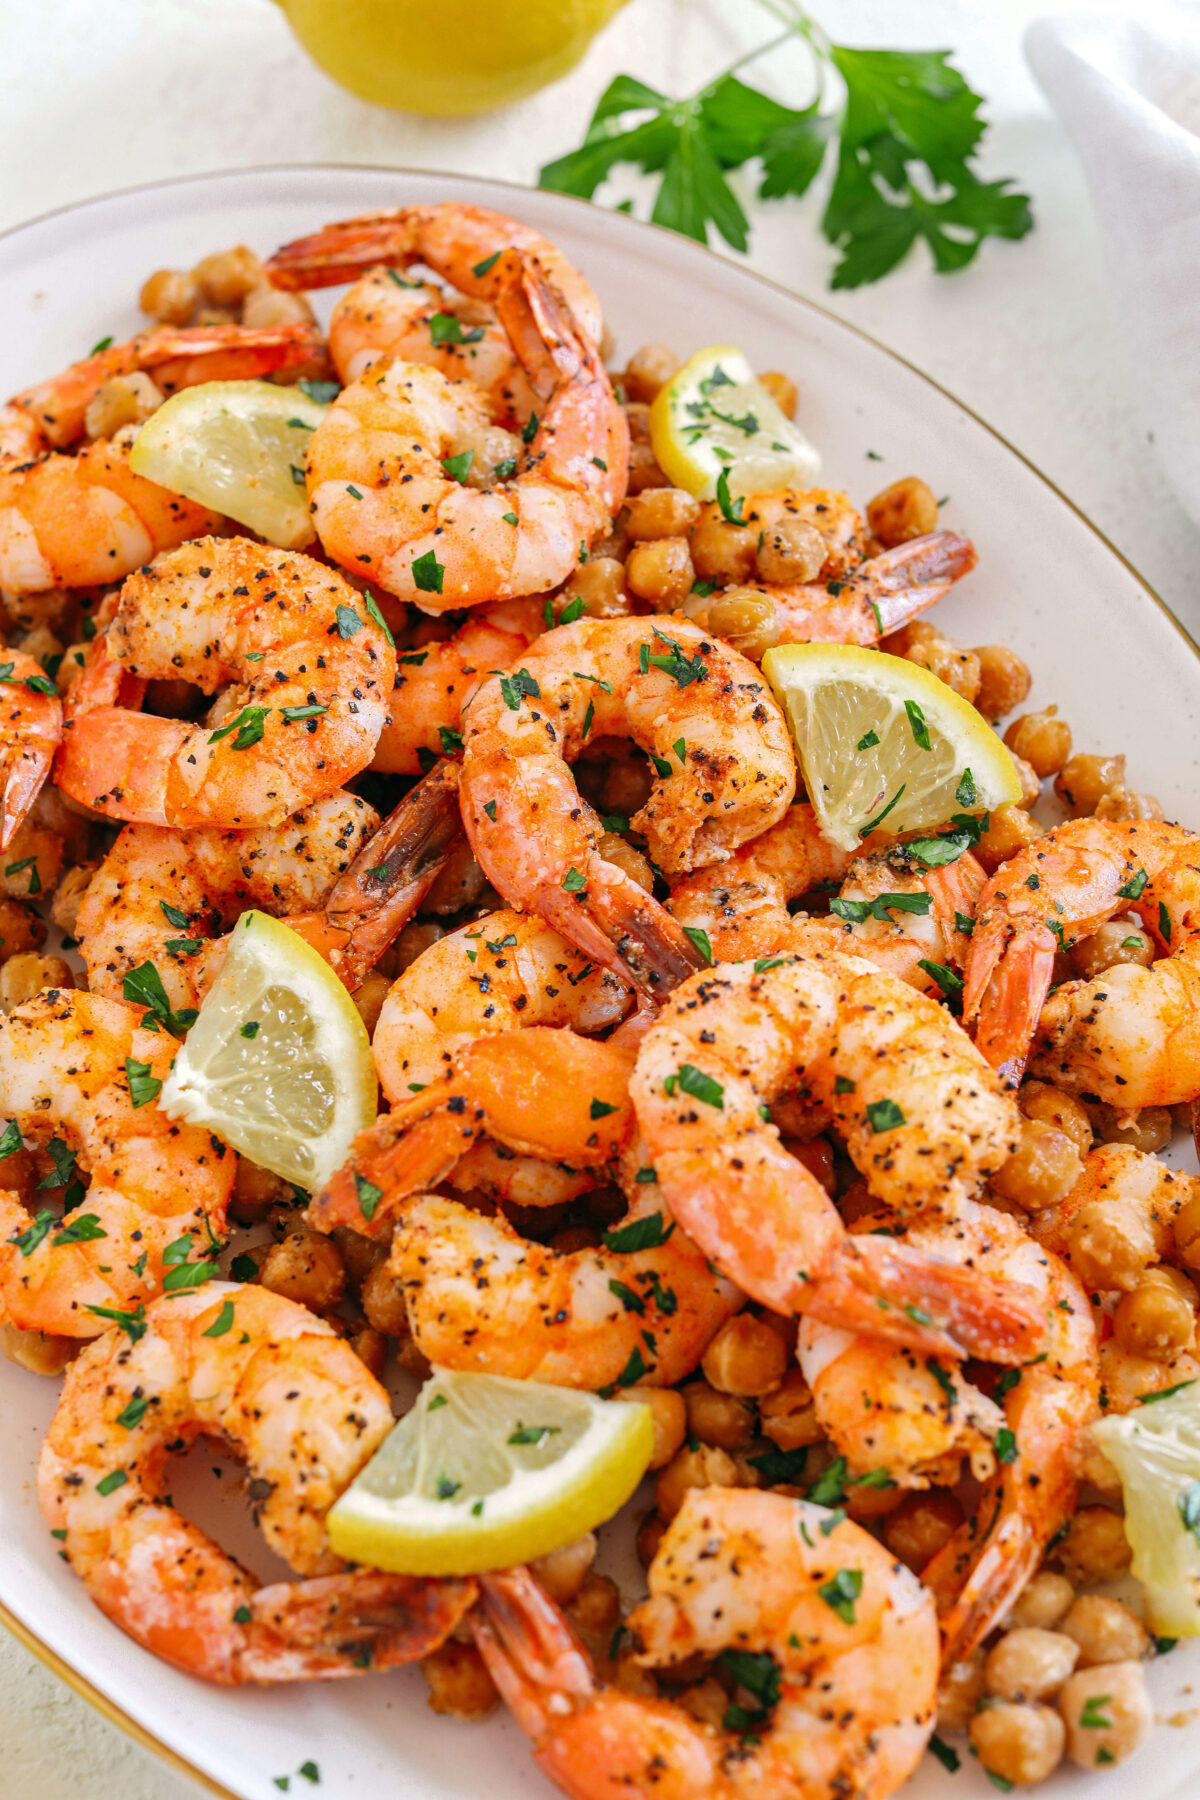 Flavorful Lemon Garlic Shrimp with Chickpeas easily made in under 30 minutes all on one pan with just a few simple ingredients!  Perfect as an appetizer, on top of a salad or even as a main dish!